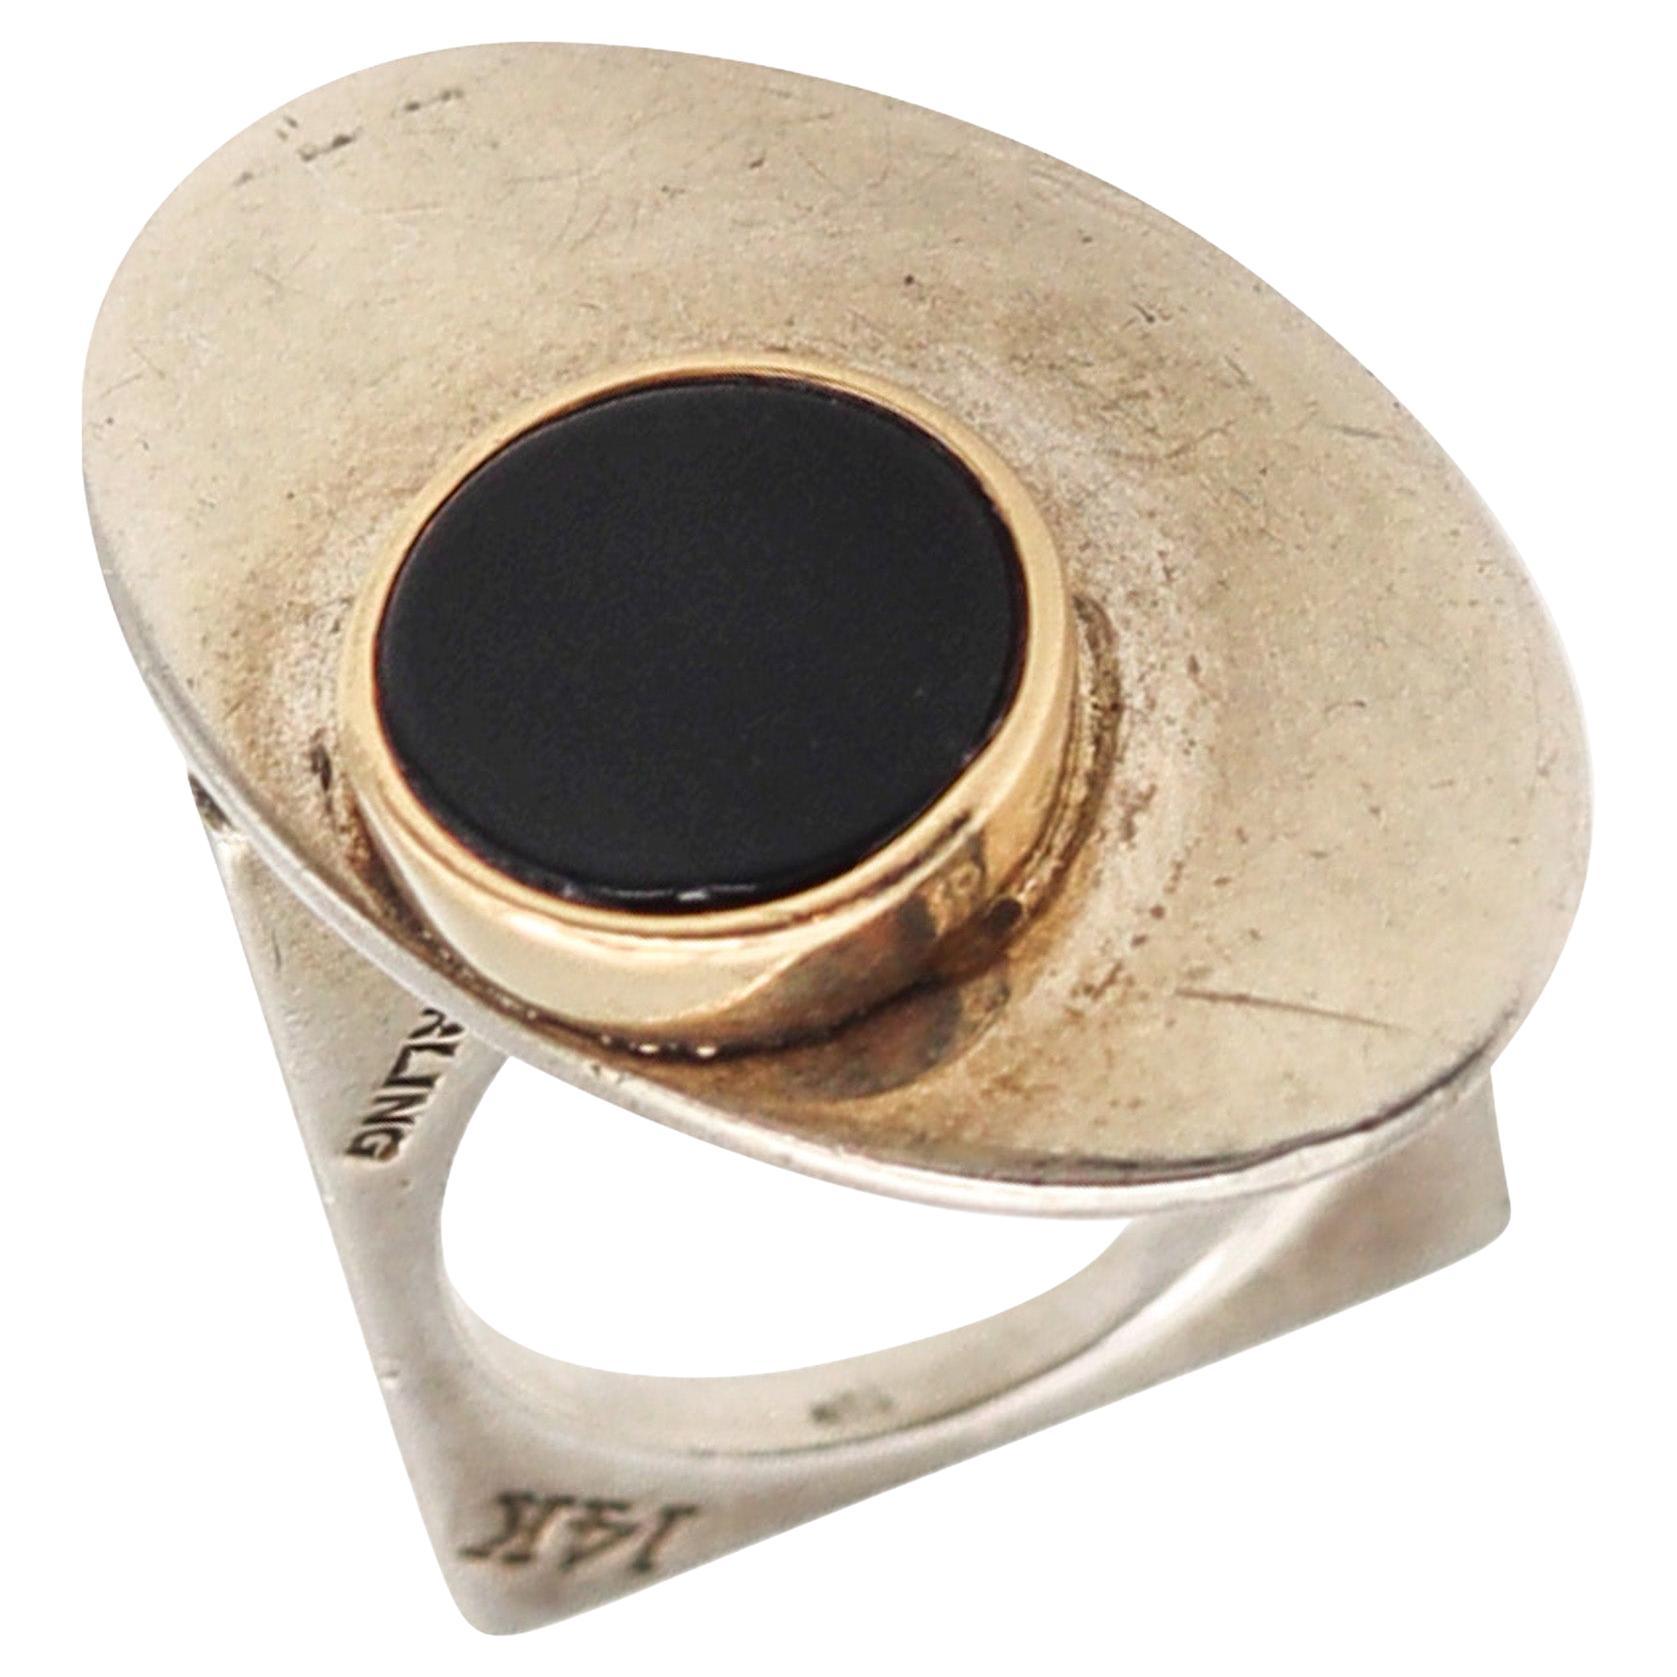 Pierre Cardin 1970 Paris Geometric Sculptural Onyx Ring 14kt Gold and Sterling For Sale